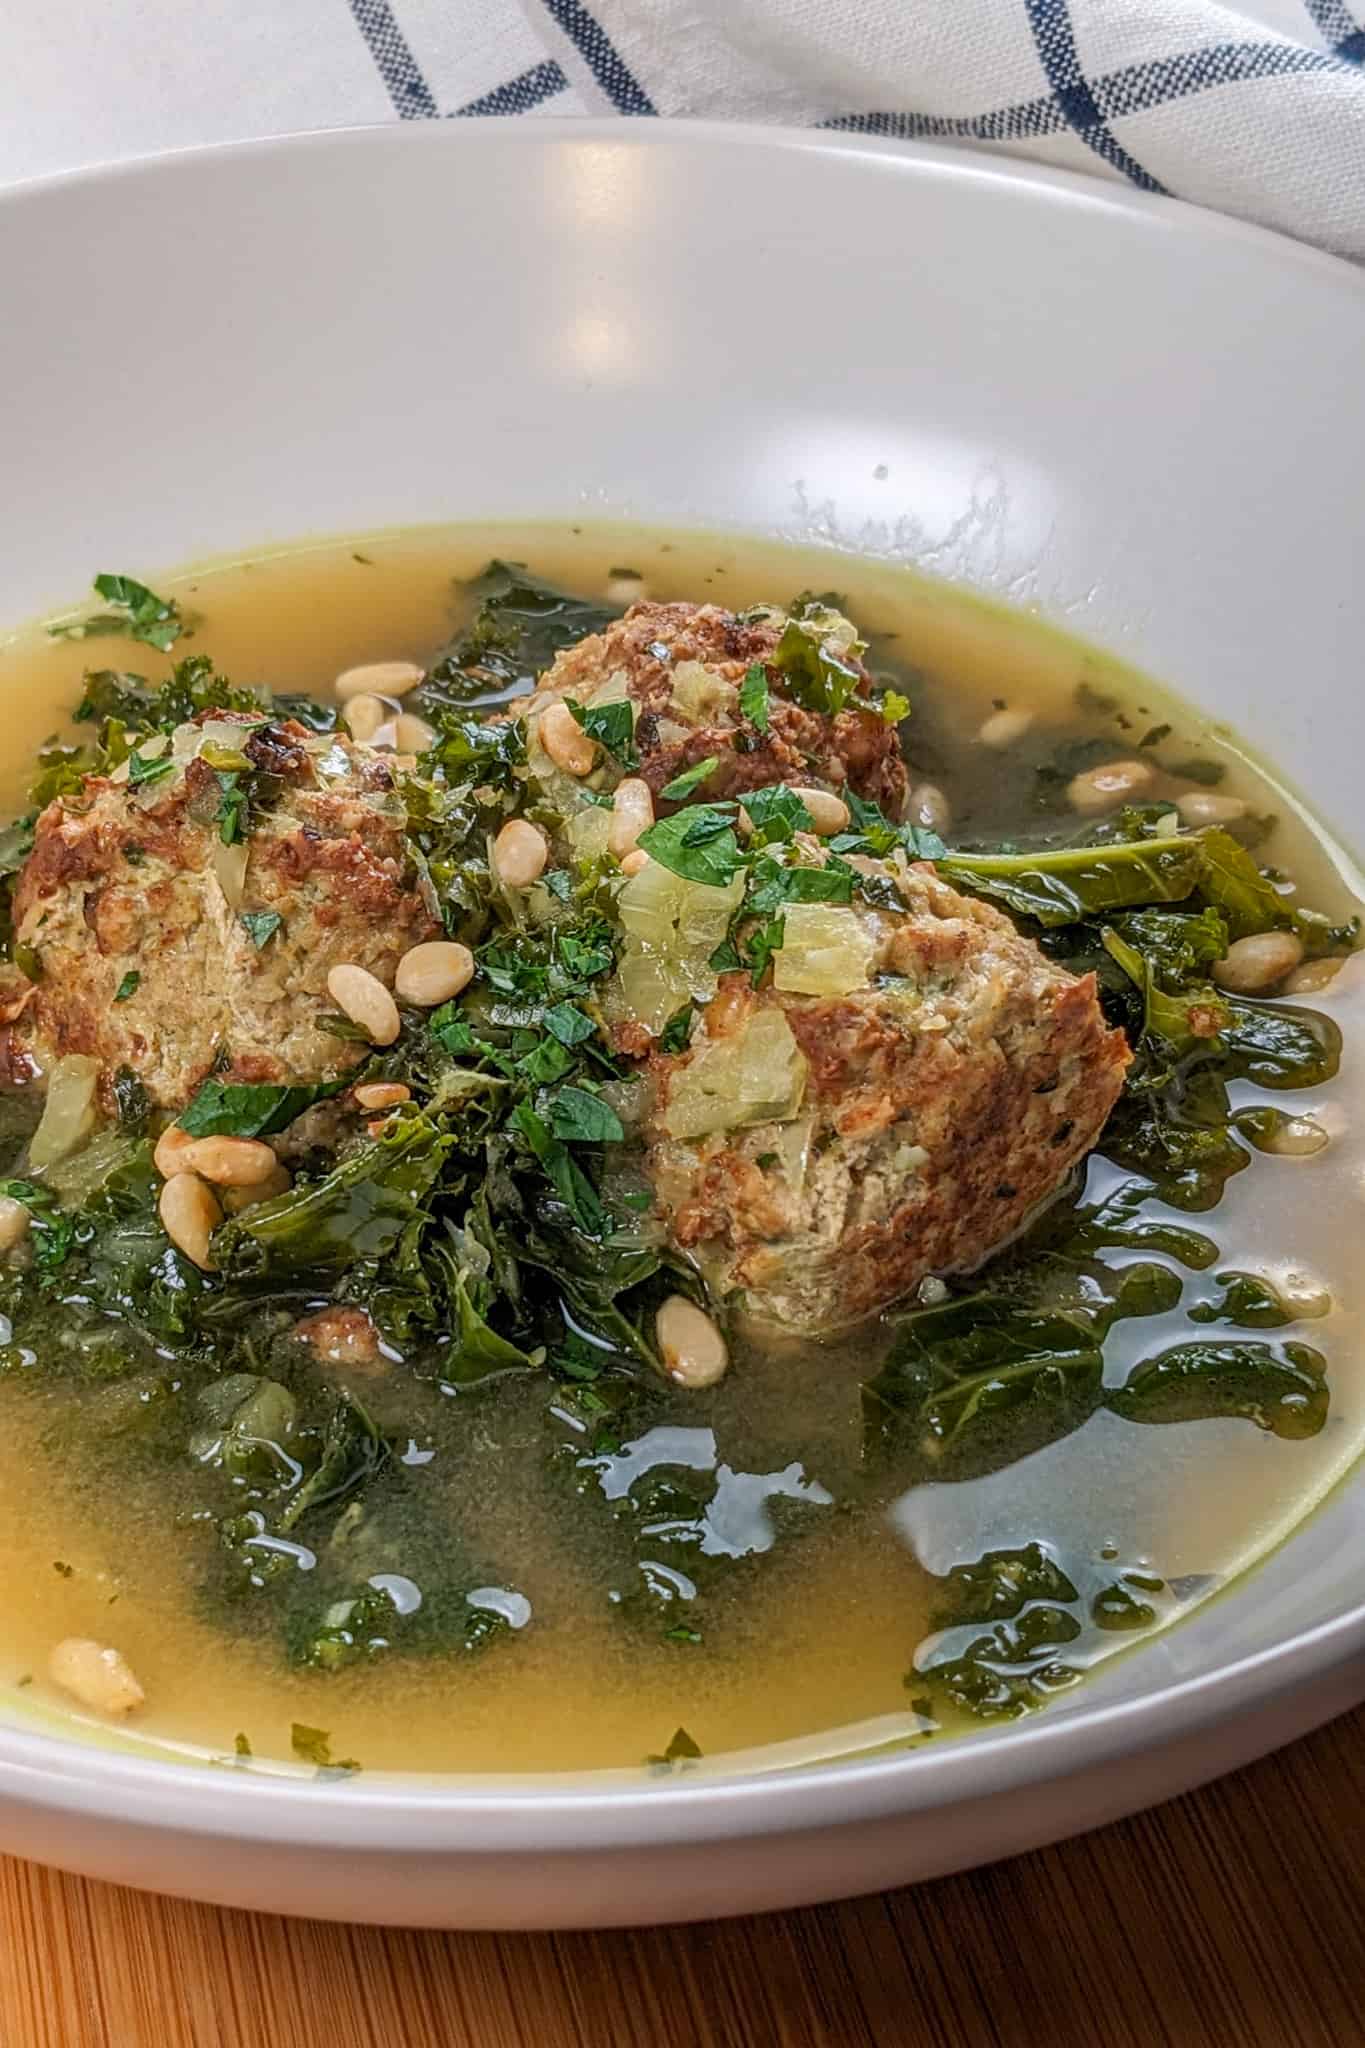 Side view of the Easy and Healthy Spicy Turkey Meatball Kale Soup om a wide rim bowl garnished with toasted pine nuts